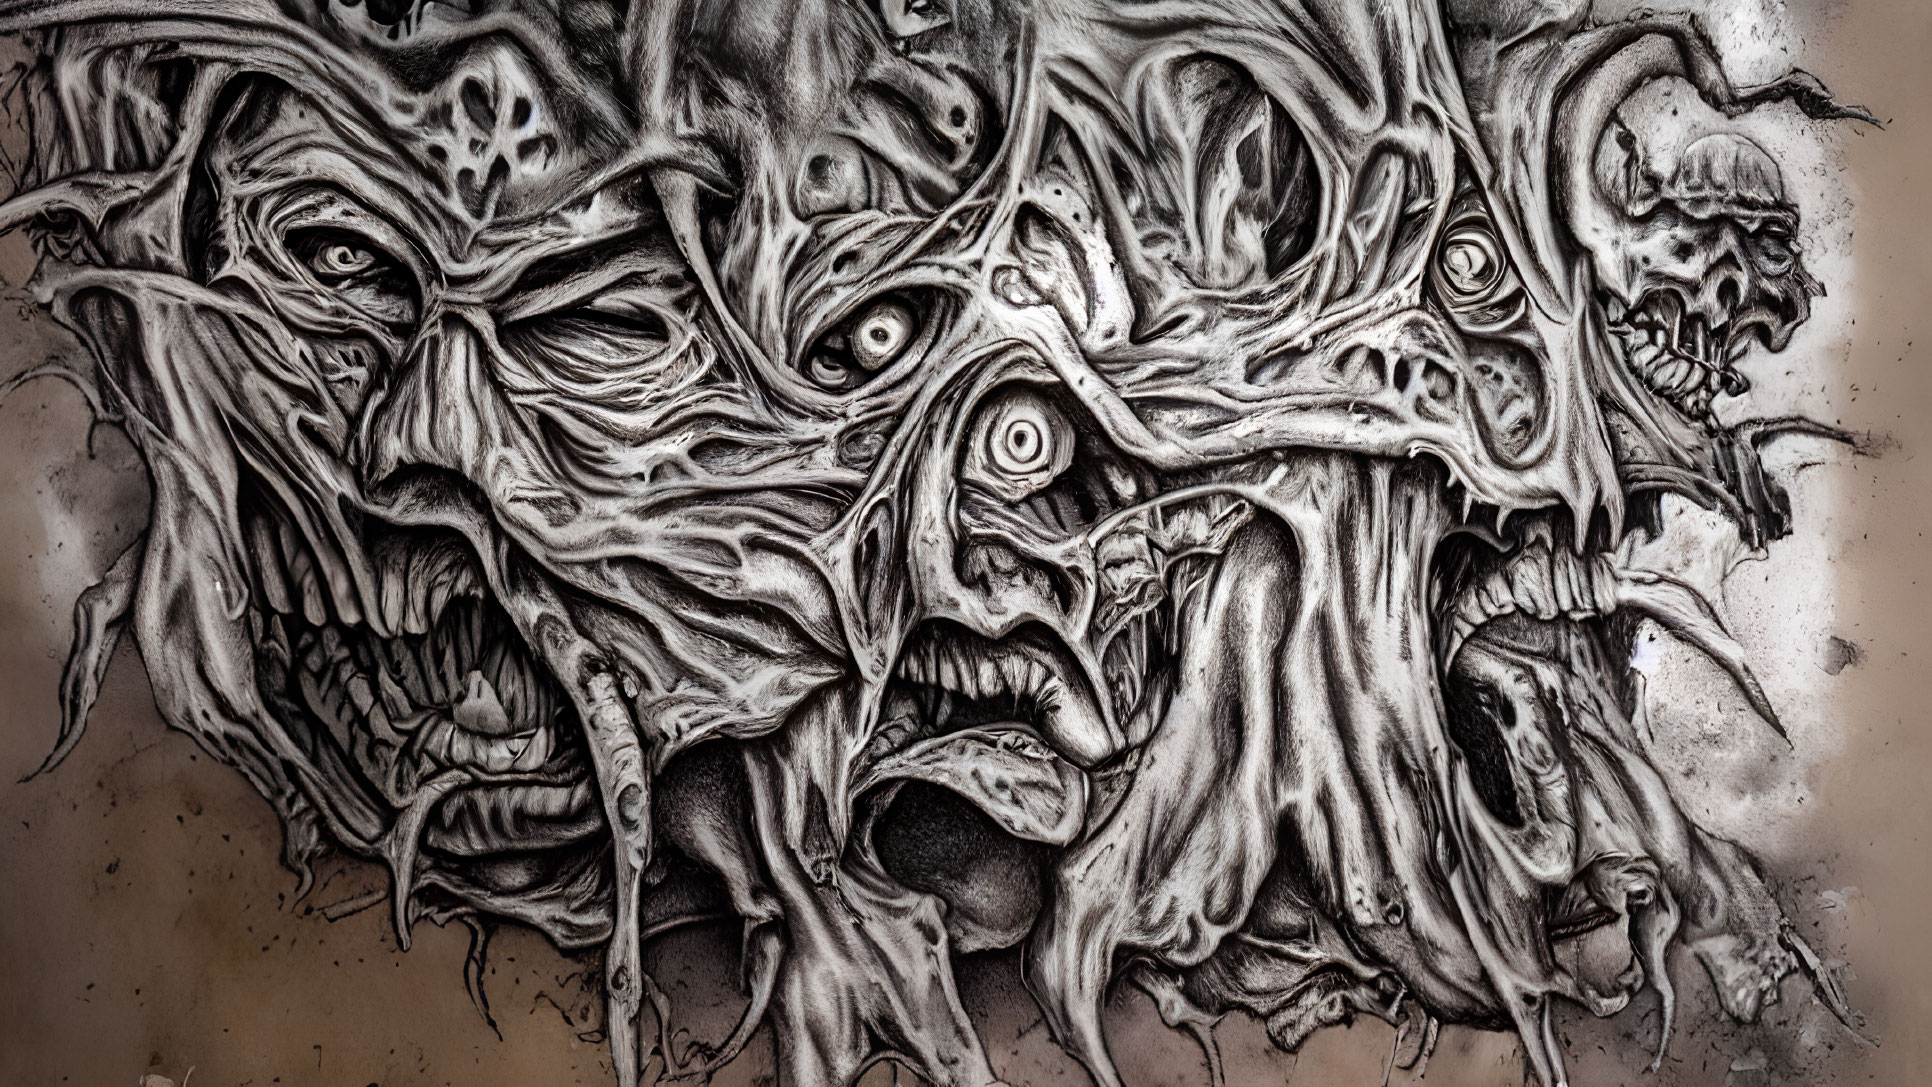 Monochromatic horror-themed illustration with tormented faces, skulls, and eerie eyes merged.